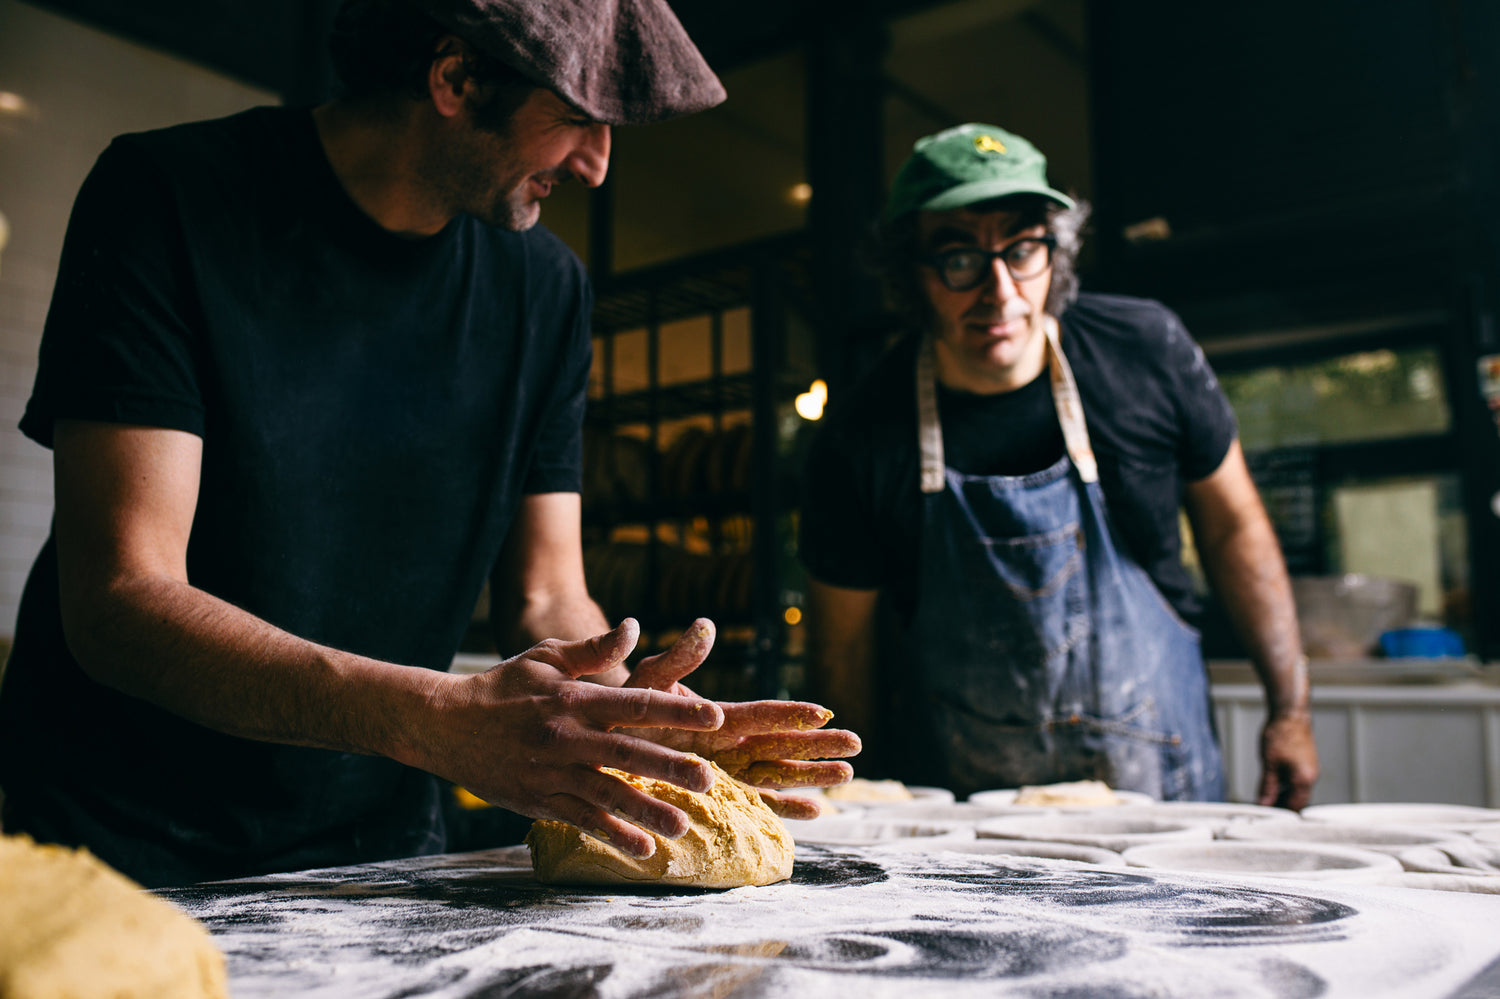 One person works dough on a flour covered table as another looks on